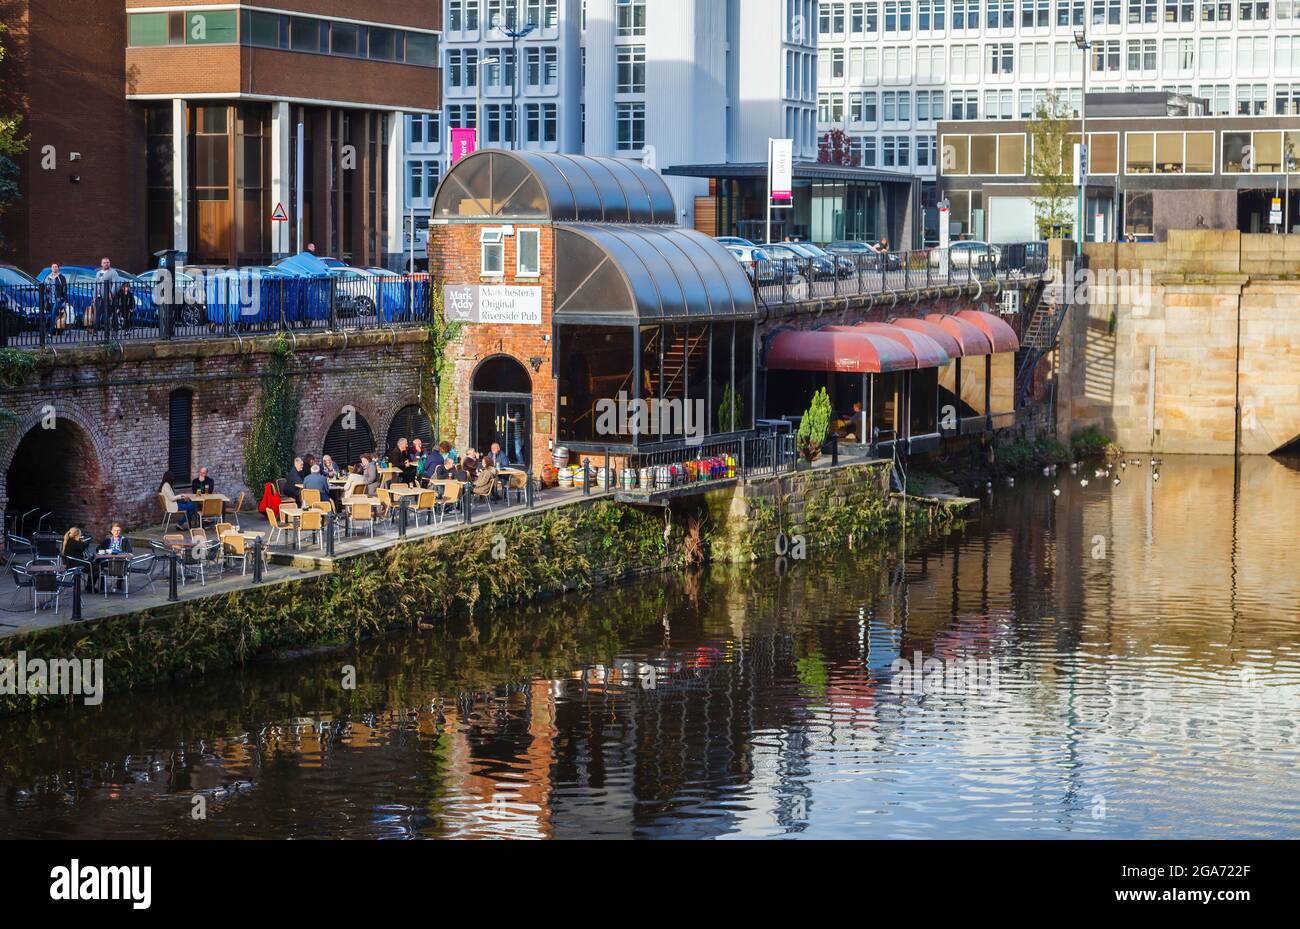 The now closed Mark Addy pub and restaurant in Stanley Street on the banks of the River Irwell in Salford, Manchester, north-west England, UK Stock Photo